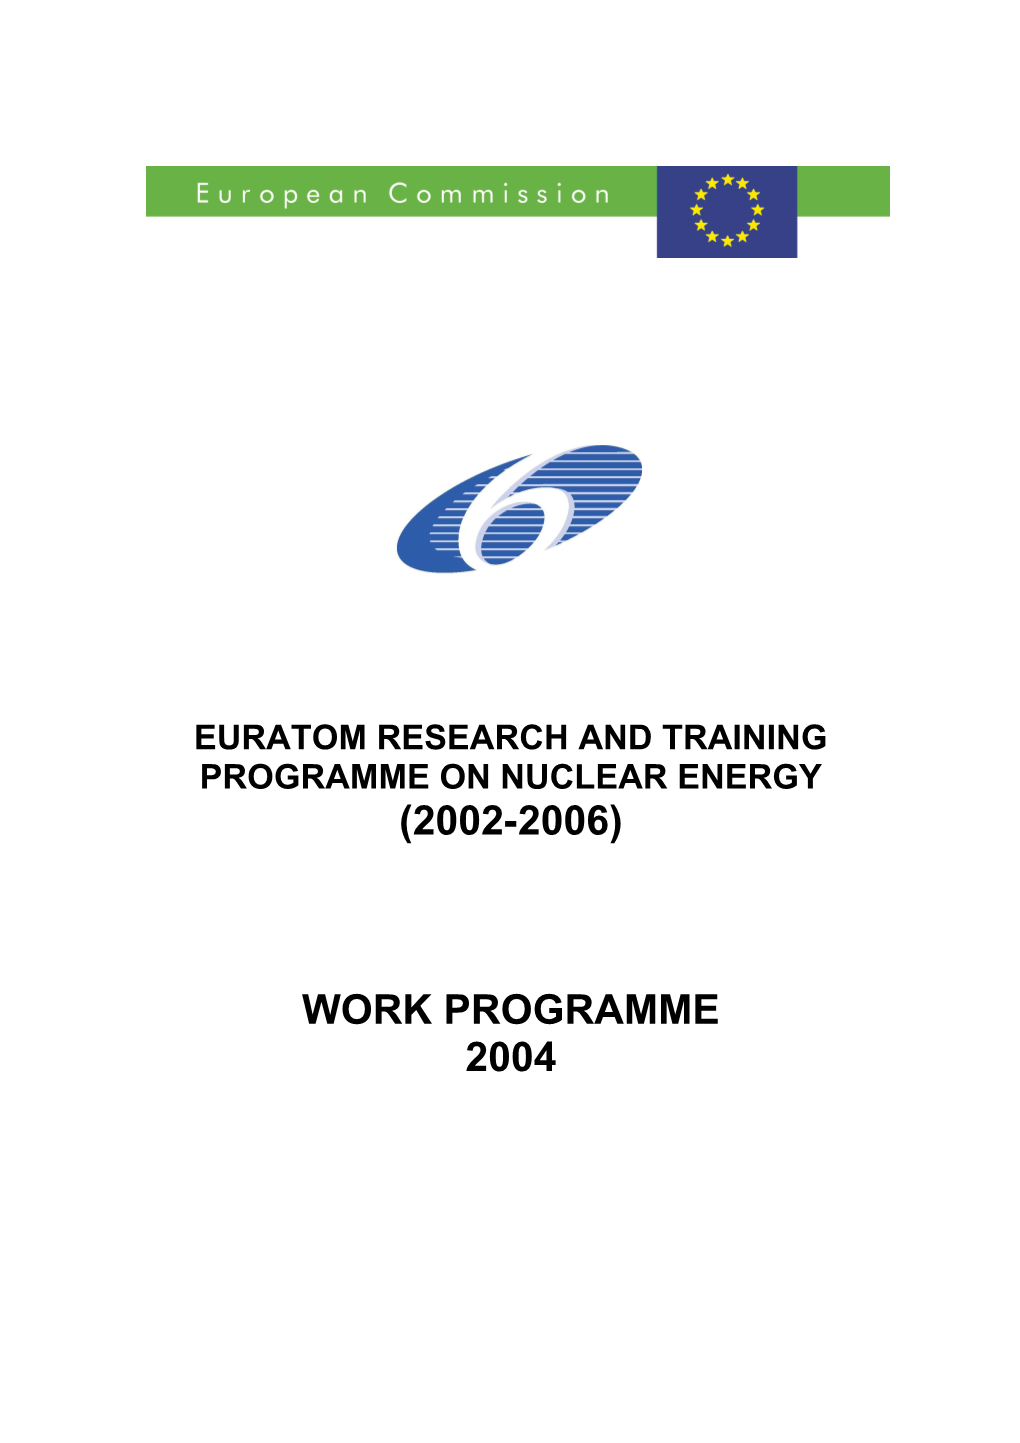 Research and Training Programme in the Field of Nuclear Energy